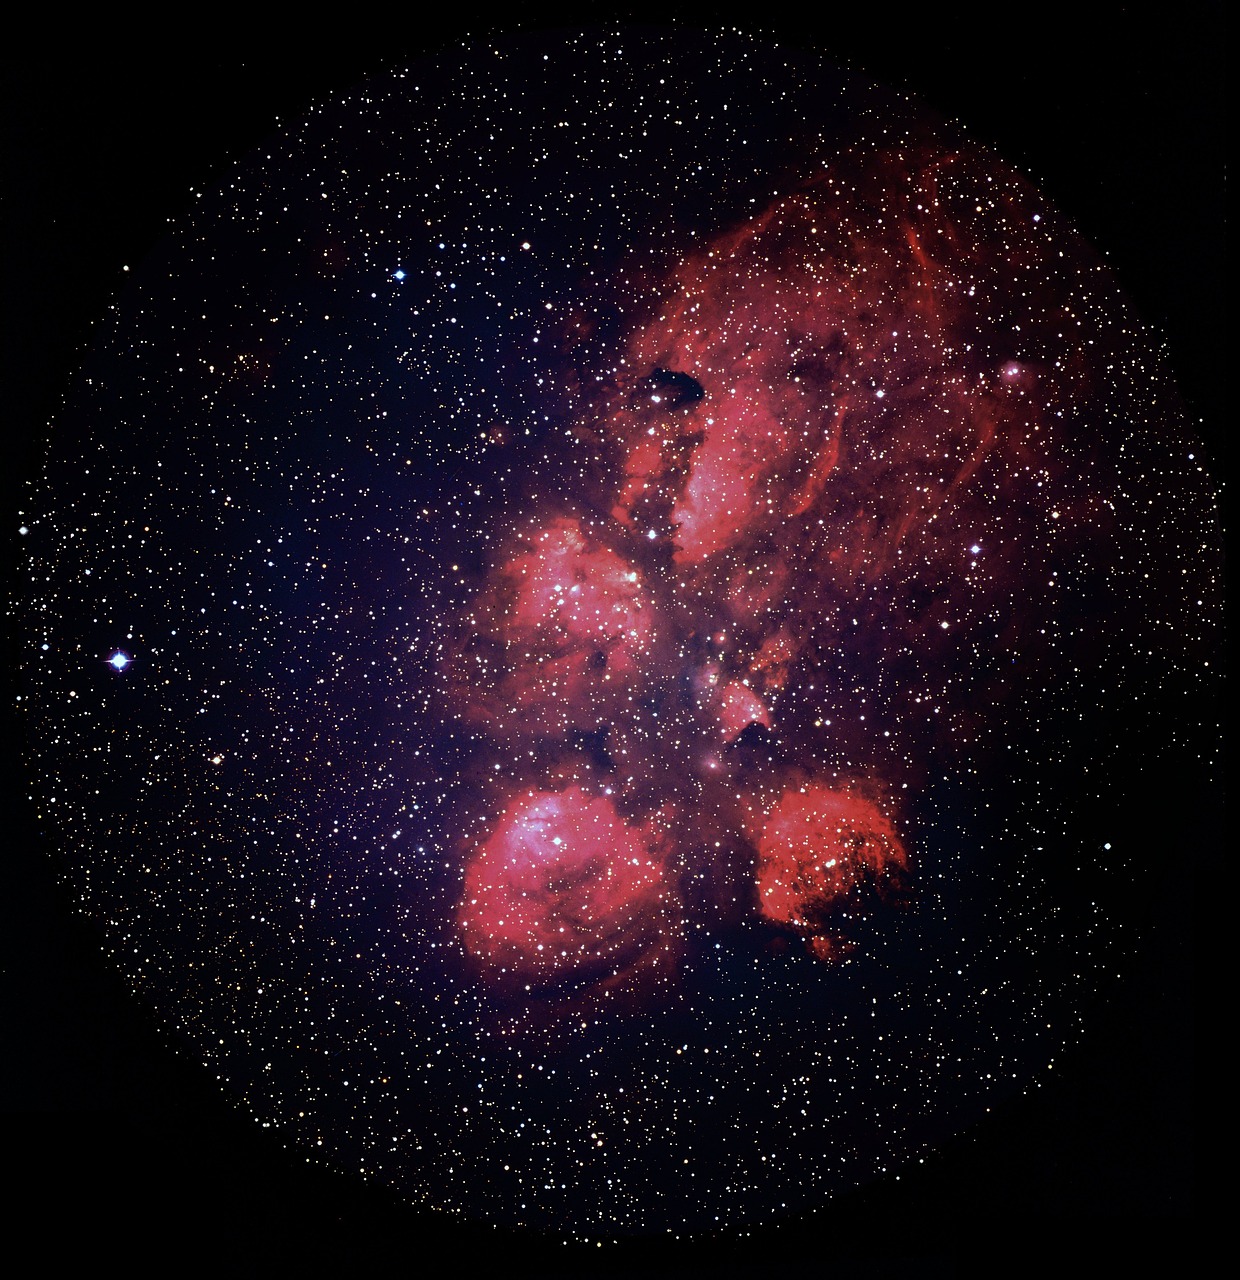 a star filled sky filled with lots of stars, a portrait, by William Powhida, deep colour\'s, red and purple nebula, taken through a telescope, nebulous bouquets